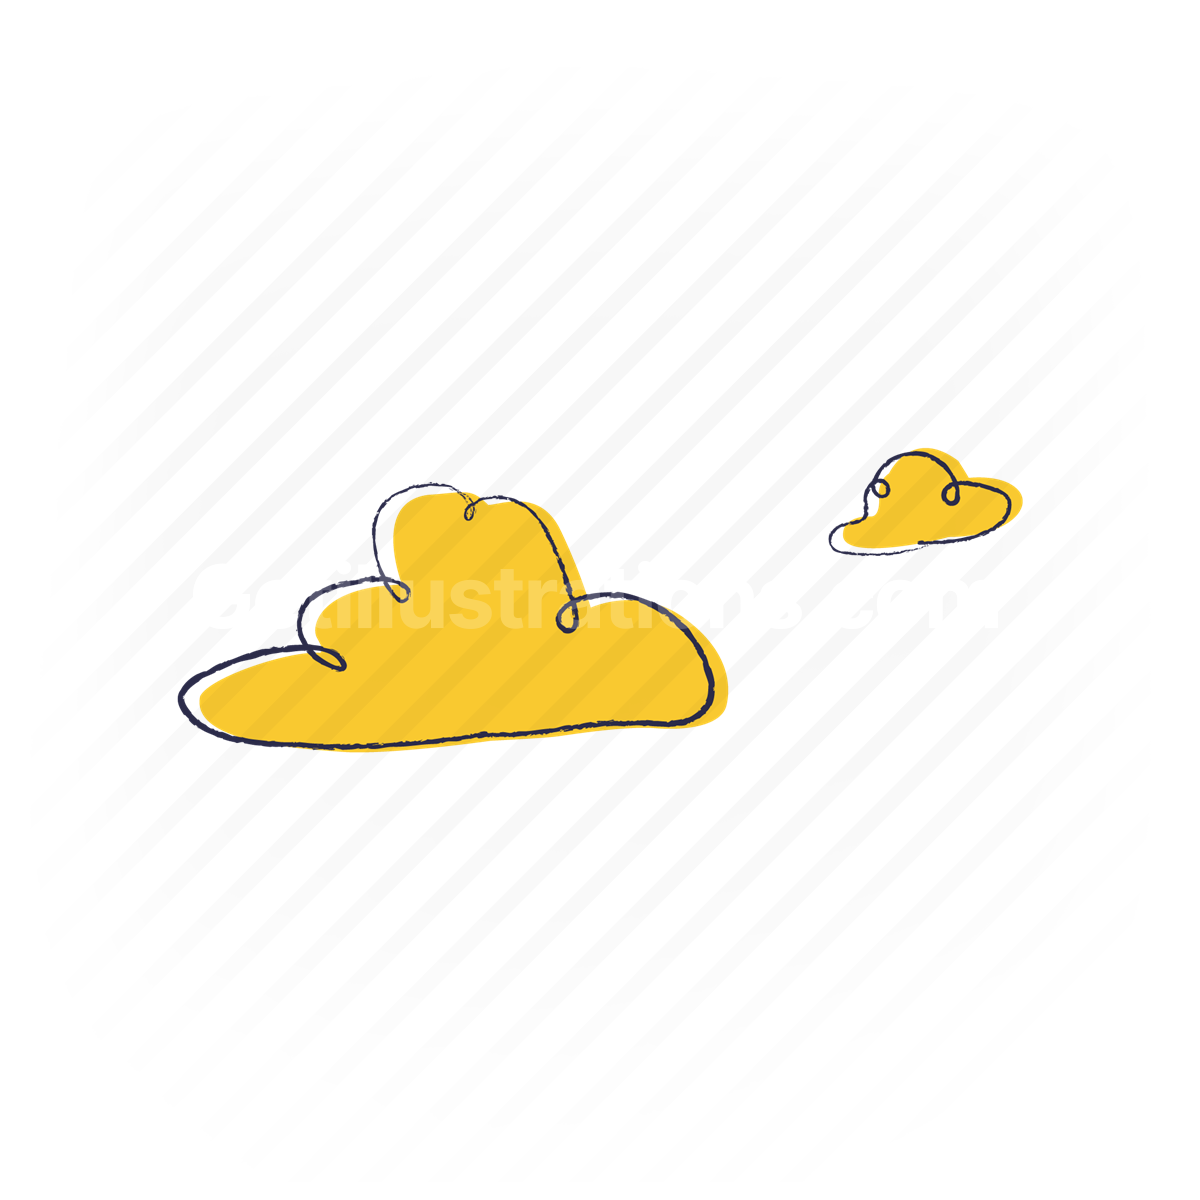 weather, forecast, cloud, cloudy, day, night